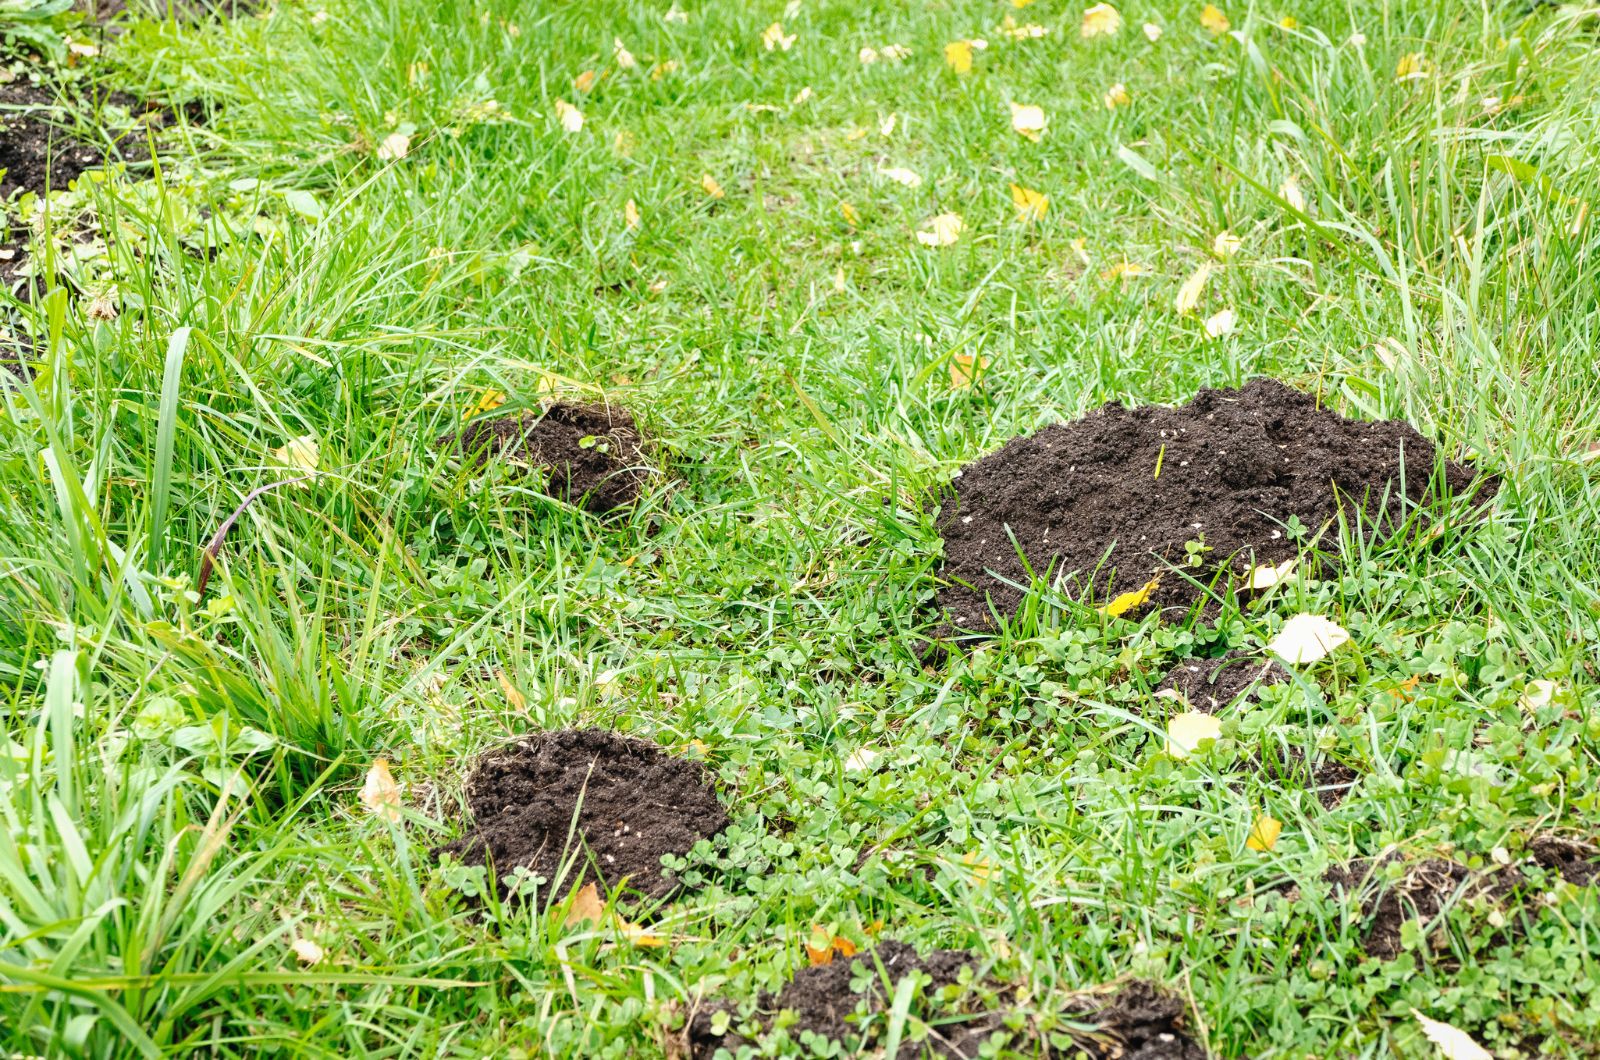 Mole holes in the yard